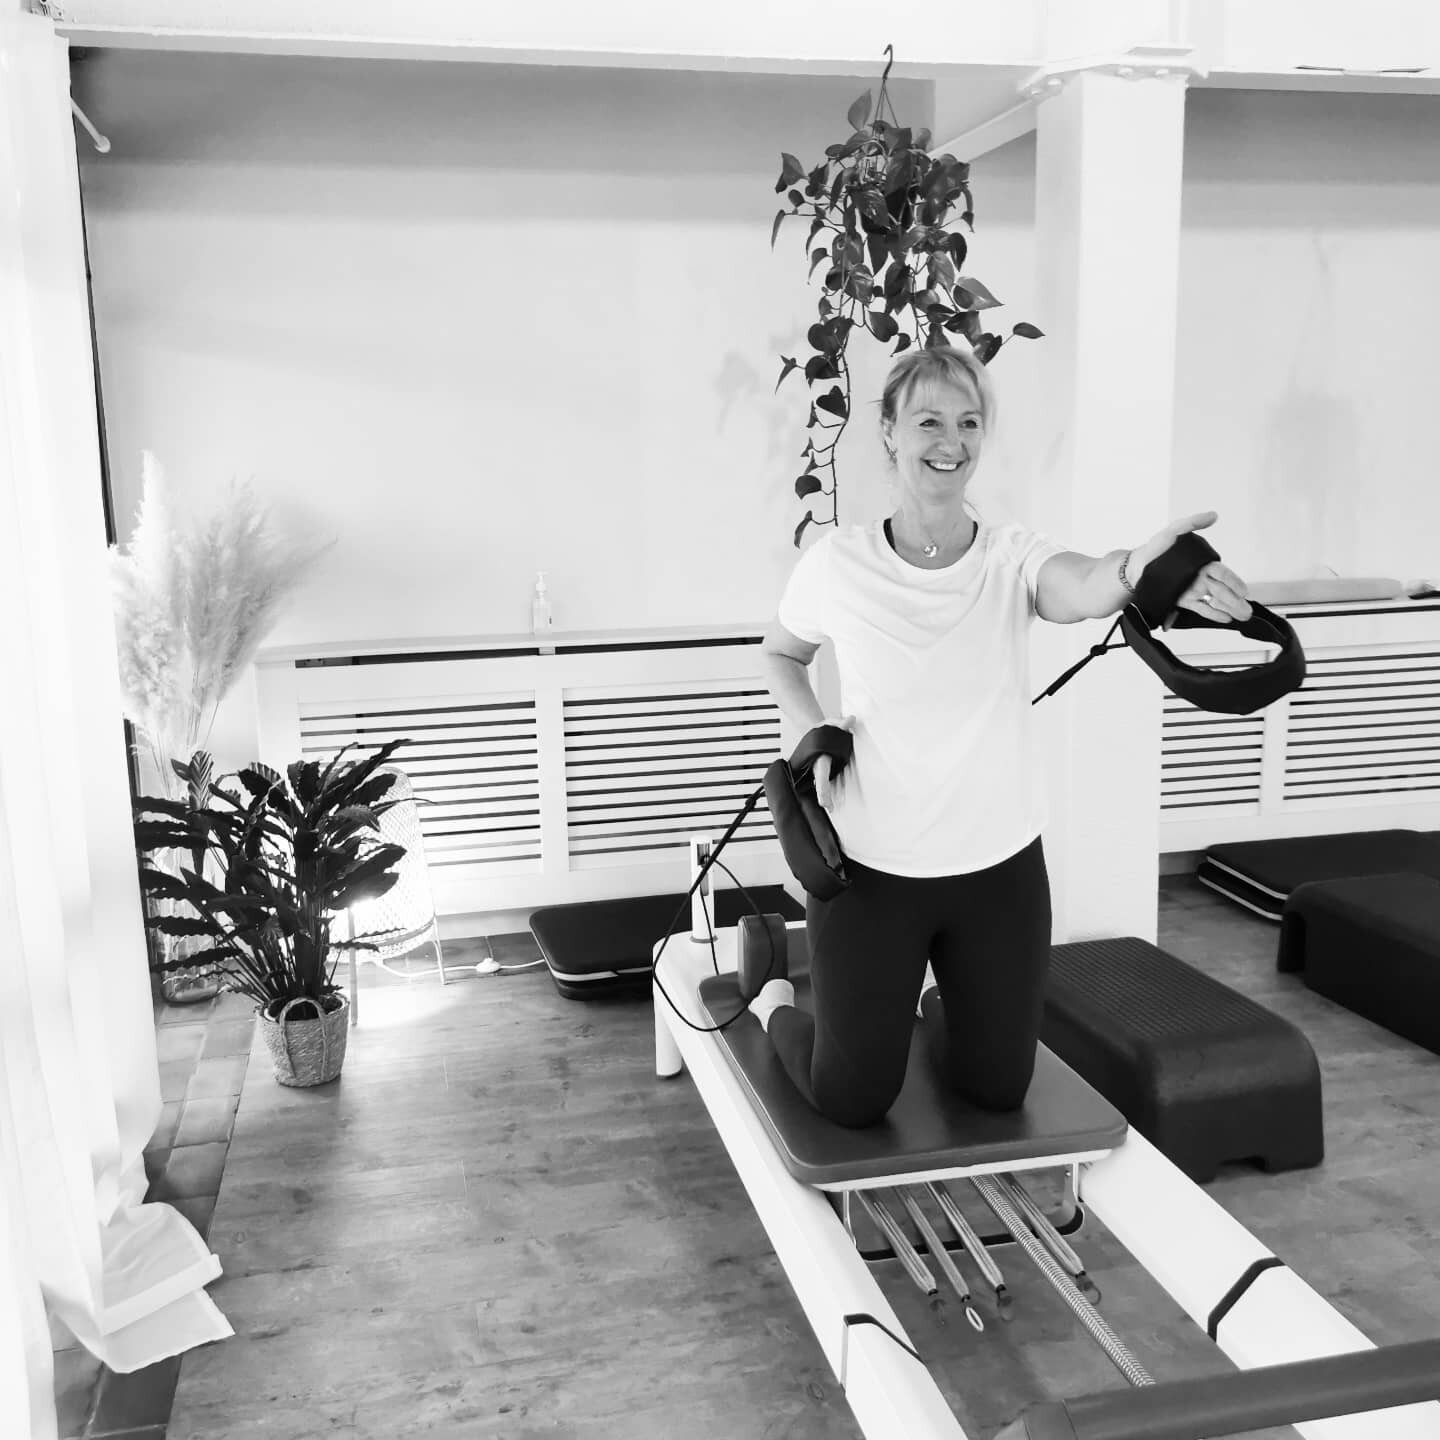 INSIDE THE STUDIO ~

The latest entrant to our inside the studio is the brilliant Nicola.

She has been with us since our opening day and is quickly becoming a pilates pro...
It is always so rewarding to teach beginners, to watch them gain confidence